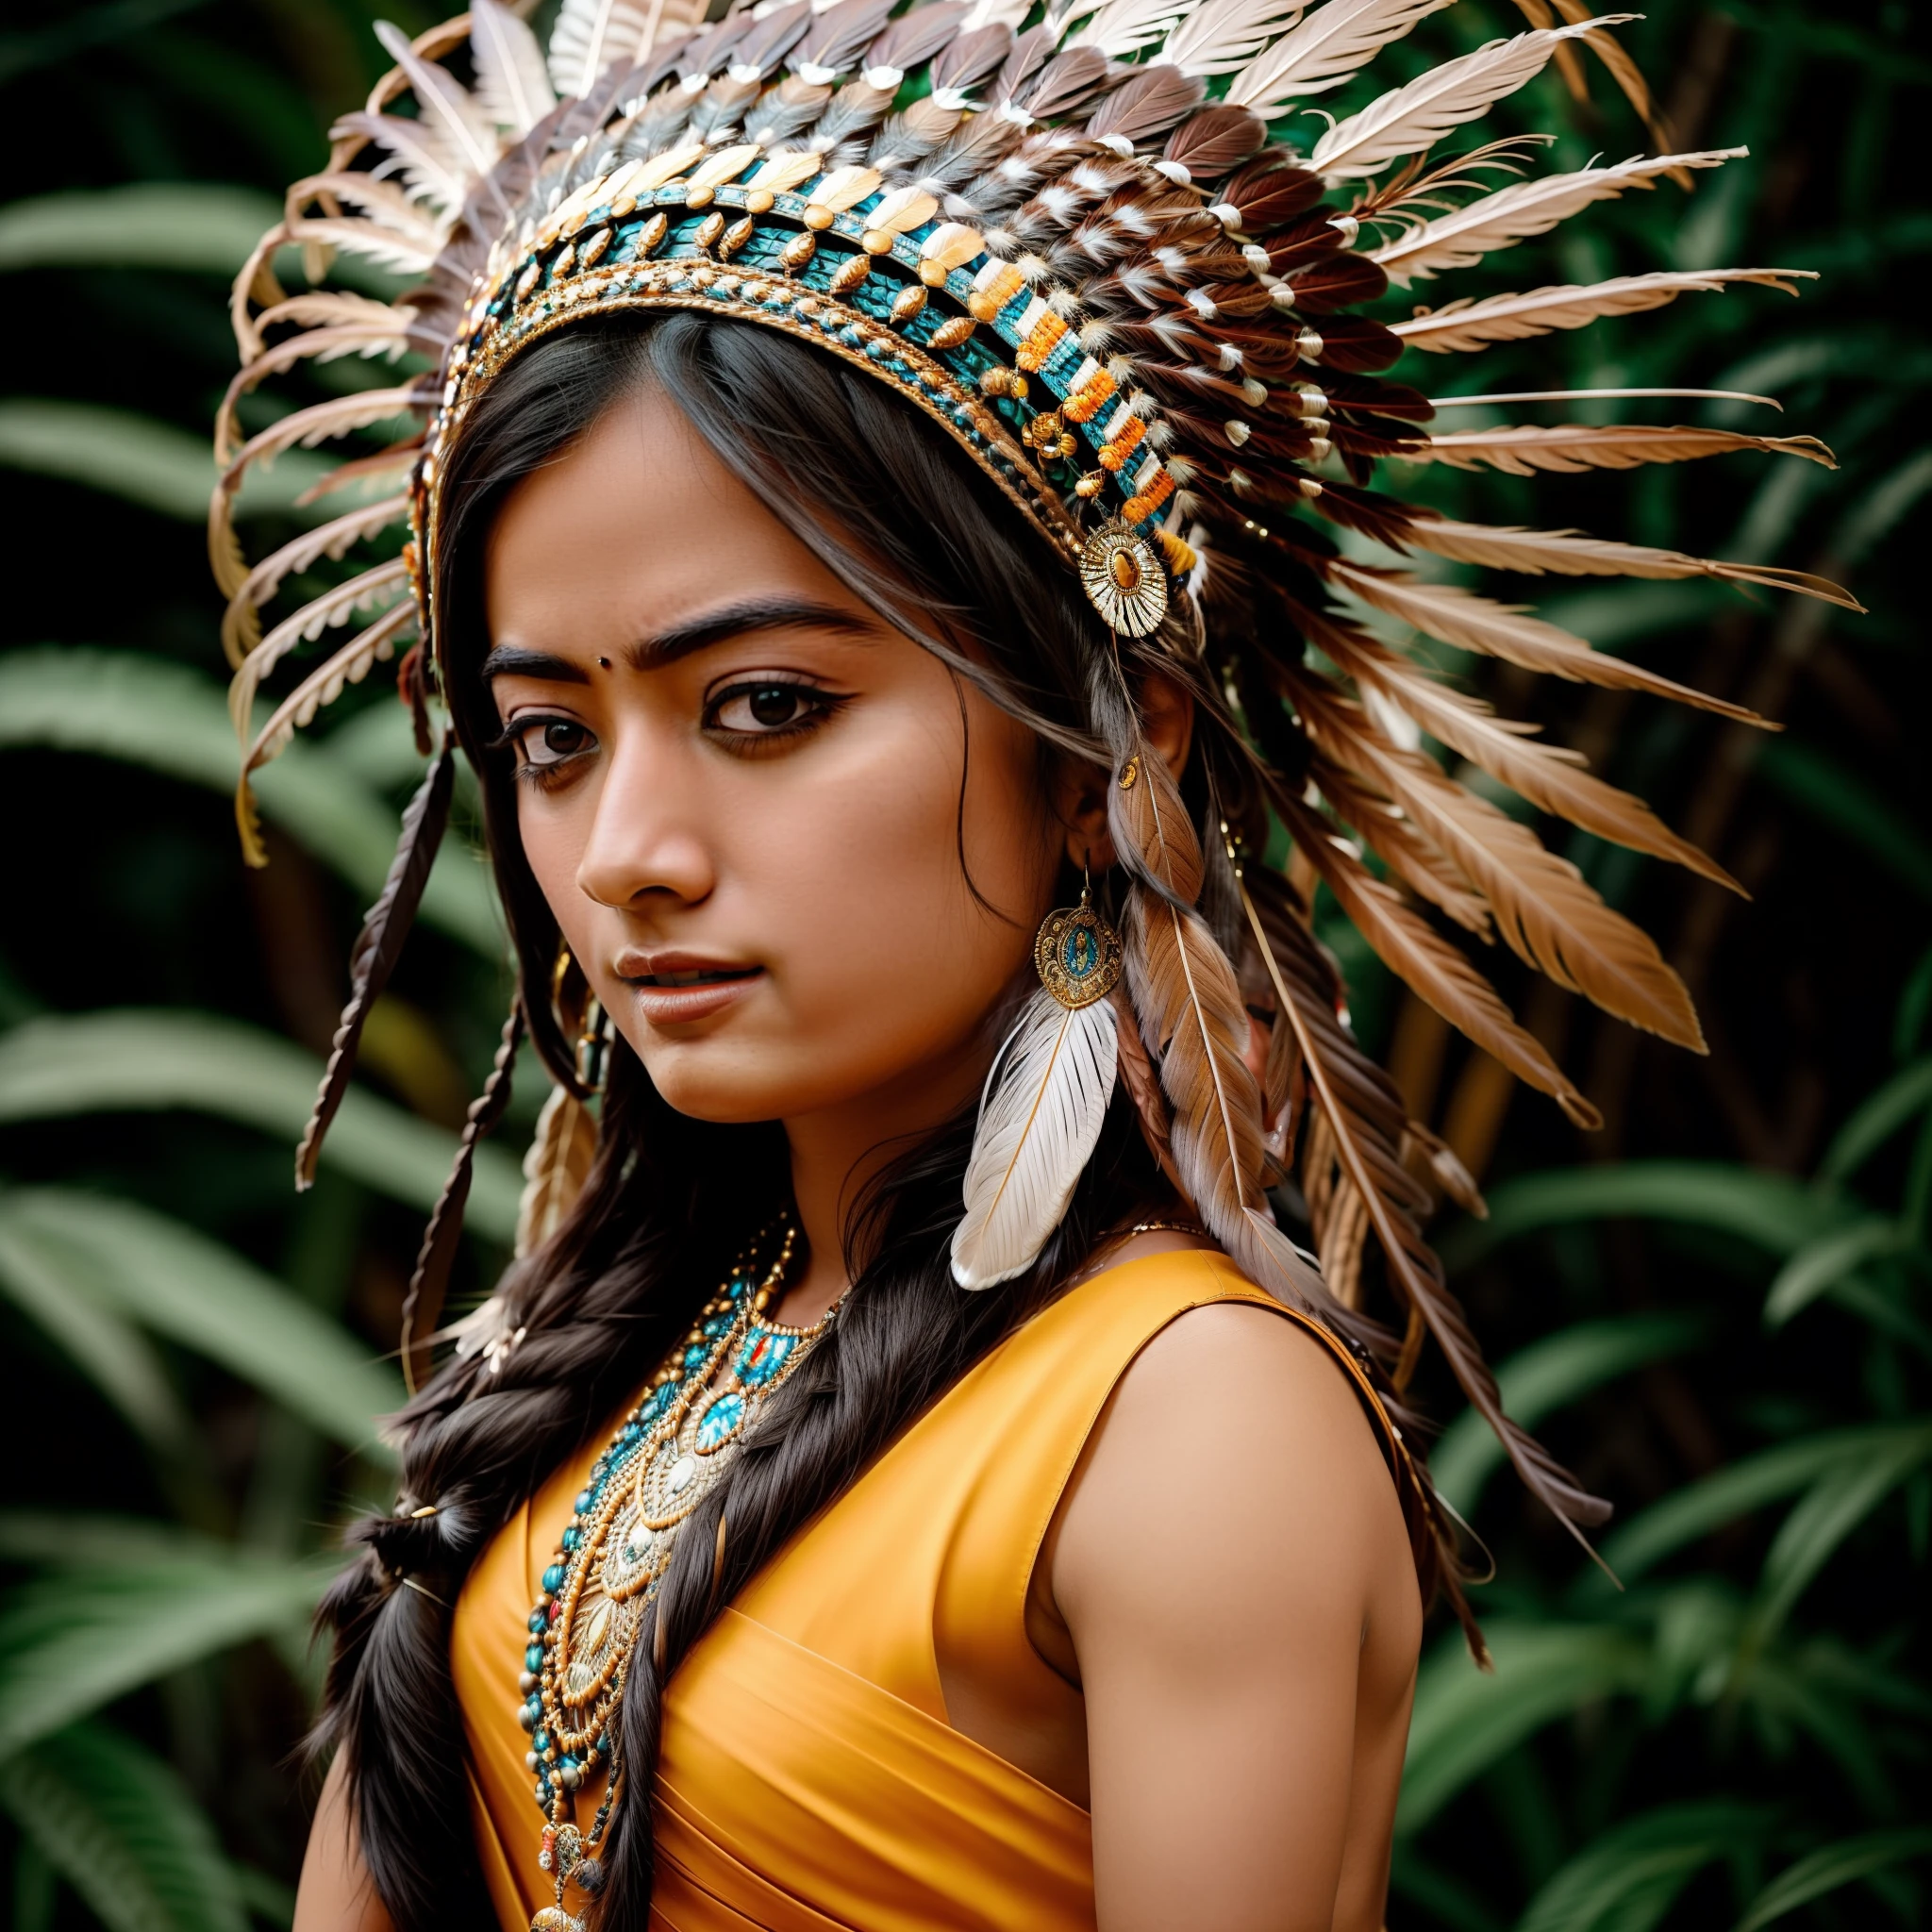 {{{cute rashmika}}} young woman wearing a feather headdress and a feather mask, she is naked, elaborate costume, feathered headdress, headdress, ornate headdress, centered headdress, native american, aztec princess portrait, beautiful costume, indian warrior, native american warrior, american indian headdress, : native american shamen fantasy, wearing crown of bright feathers